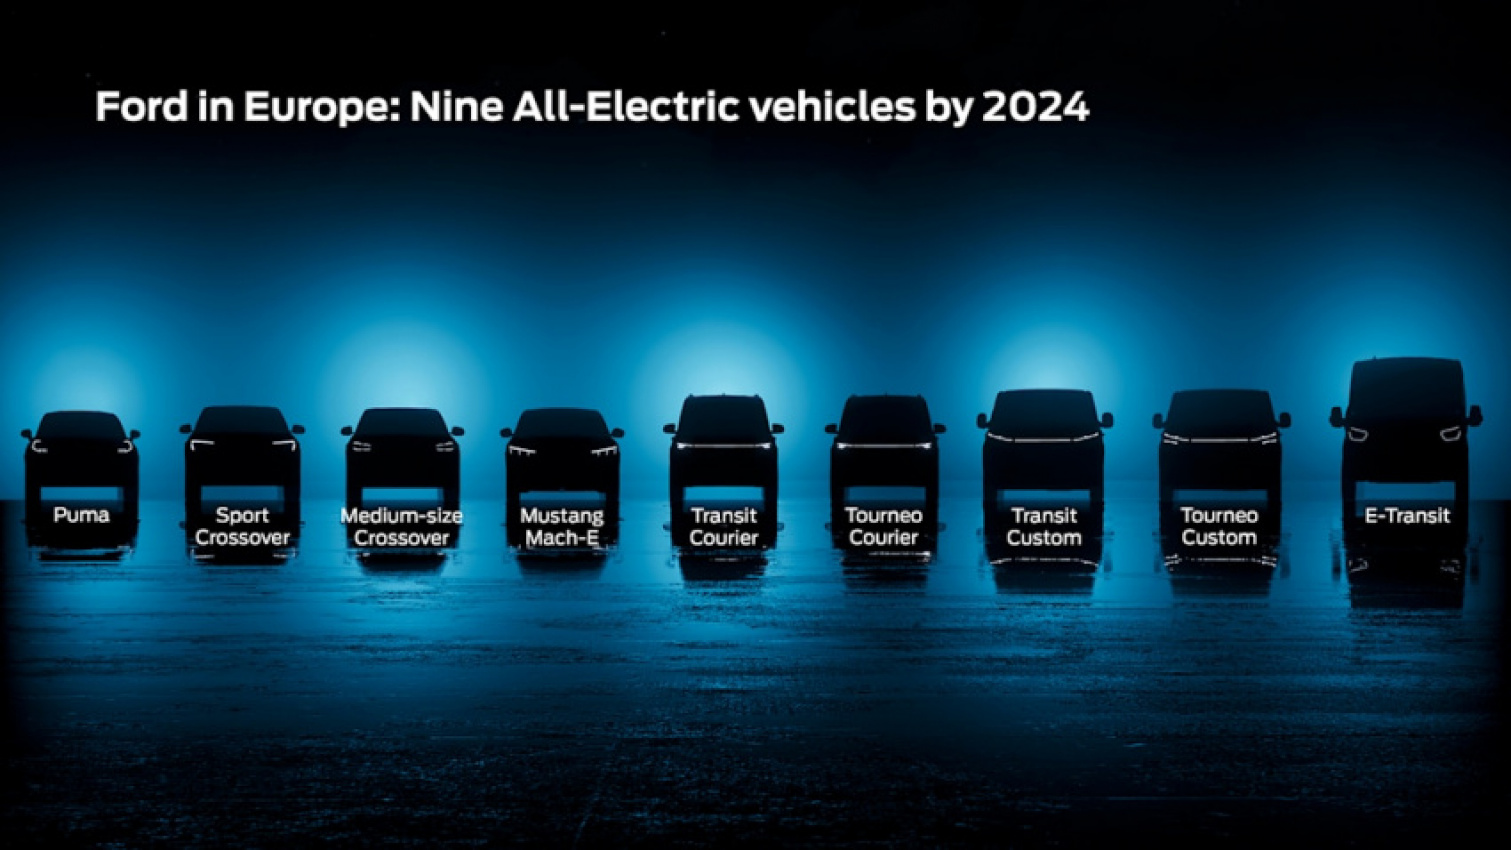 autos, cars, ford, commercial vehicles, crossover, green, minivan/van, performance, ford announces 7 new evs for europe by 2024